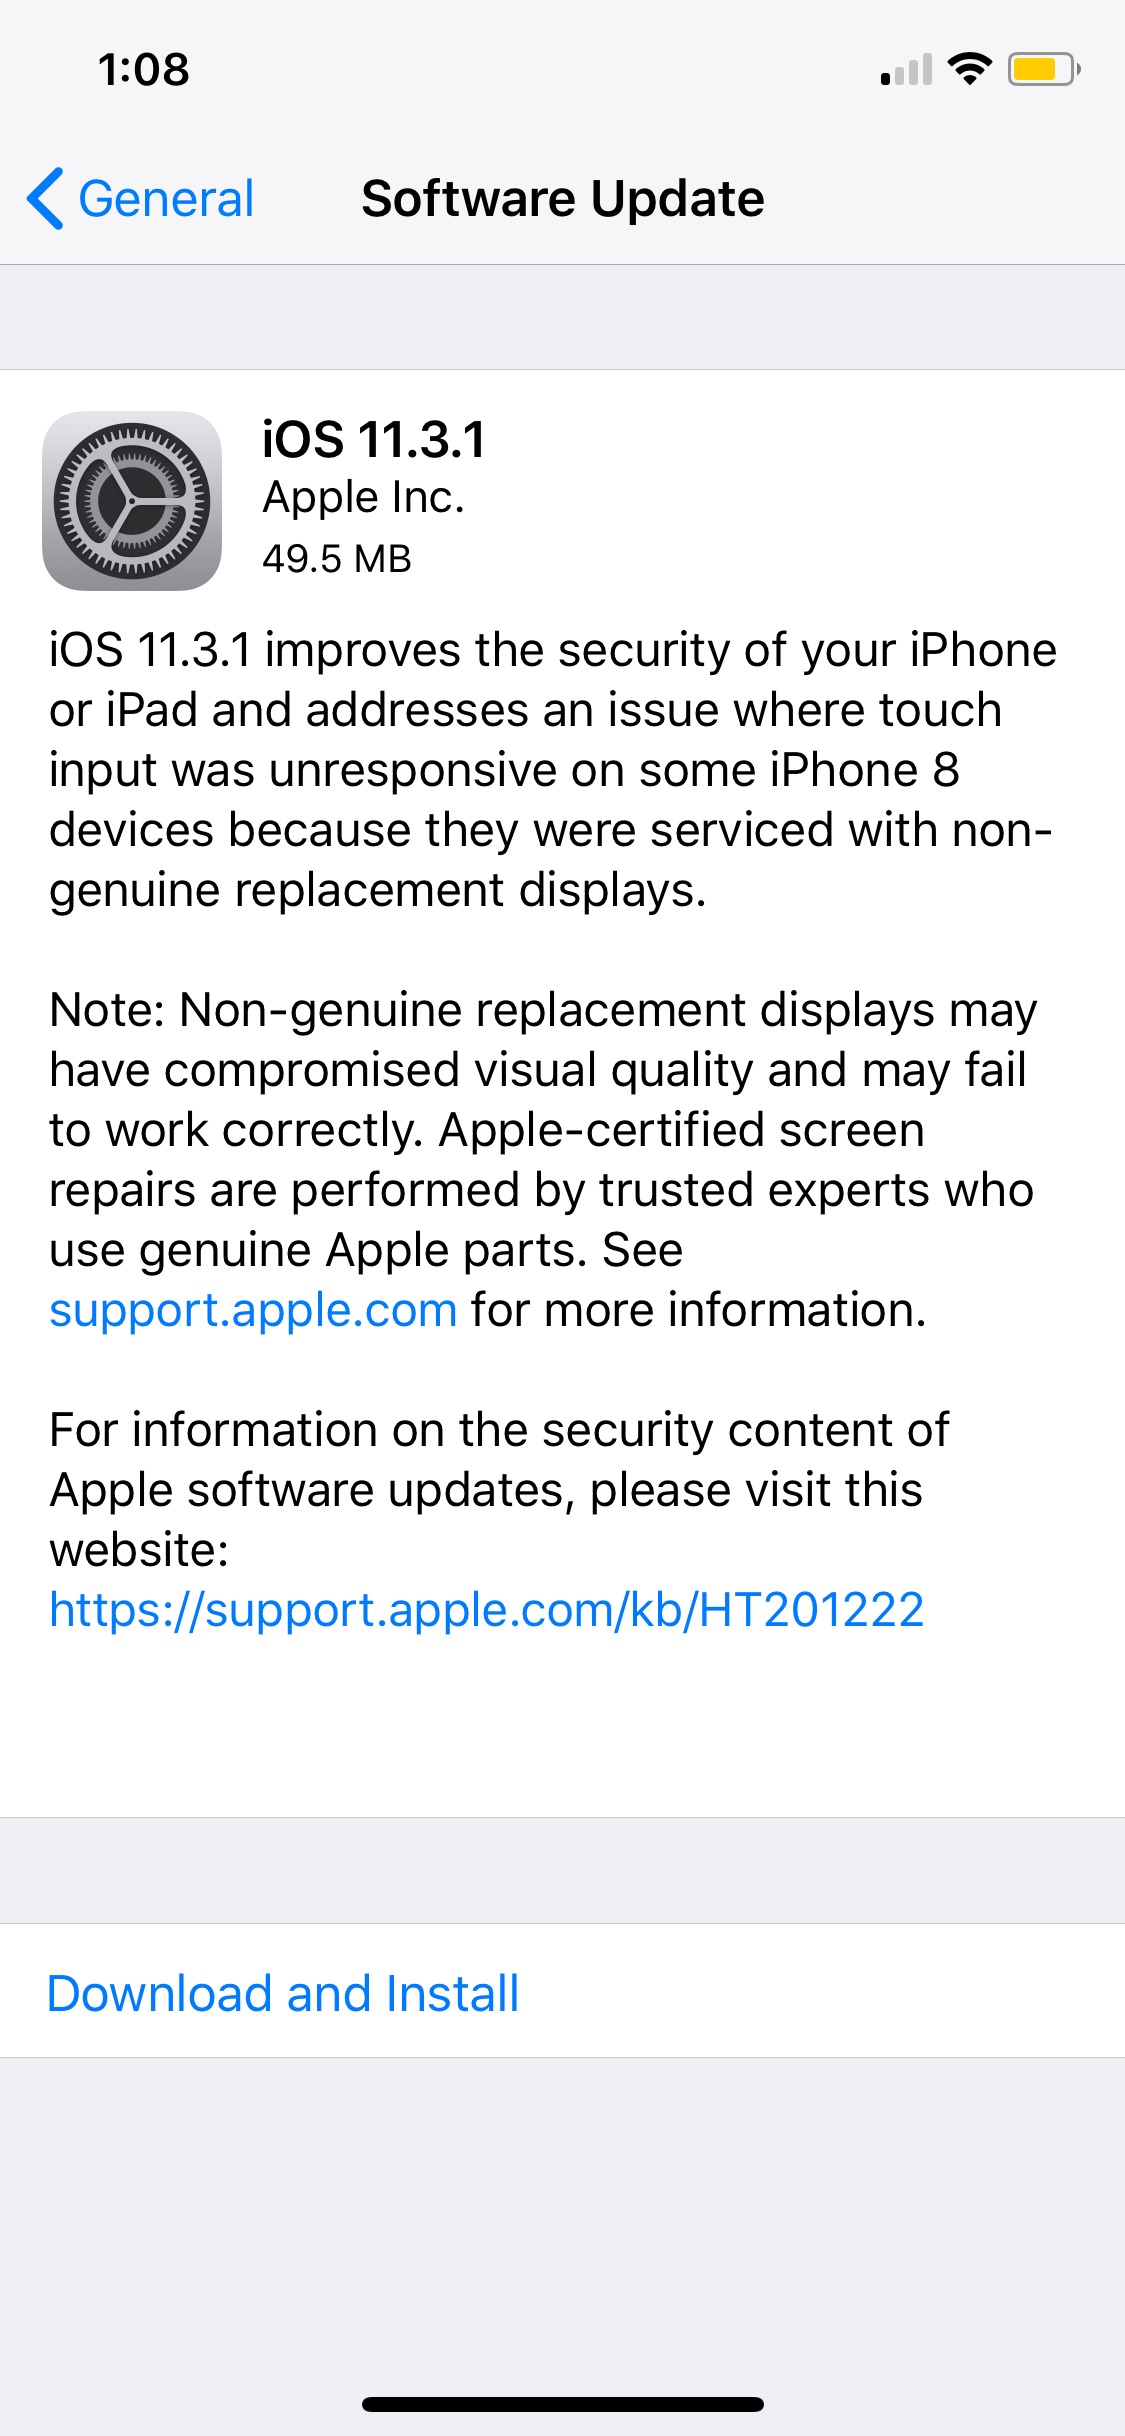 Apple Releases iOS 11.3.1 to Fix Unresponsive Third-Party Replacement Displays [Download]